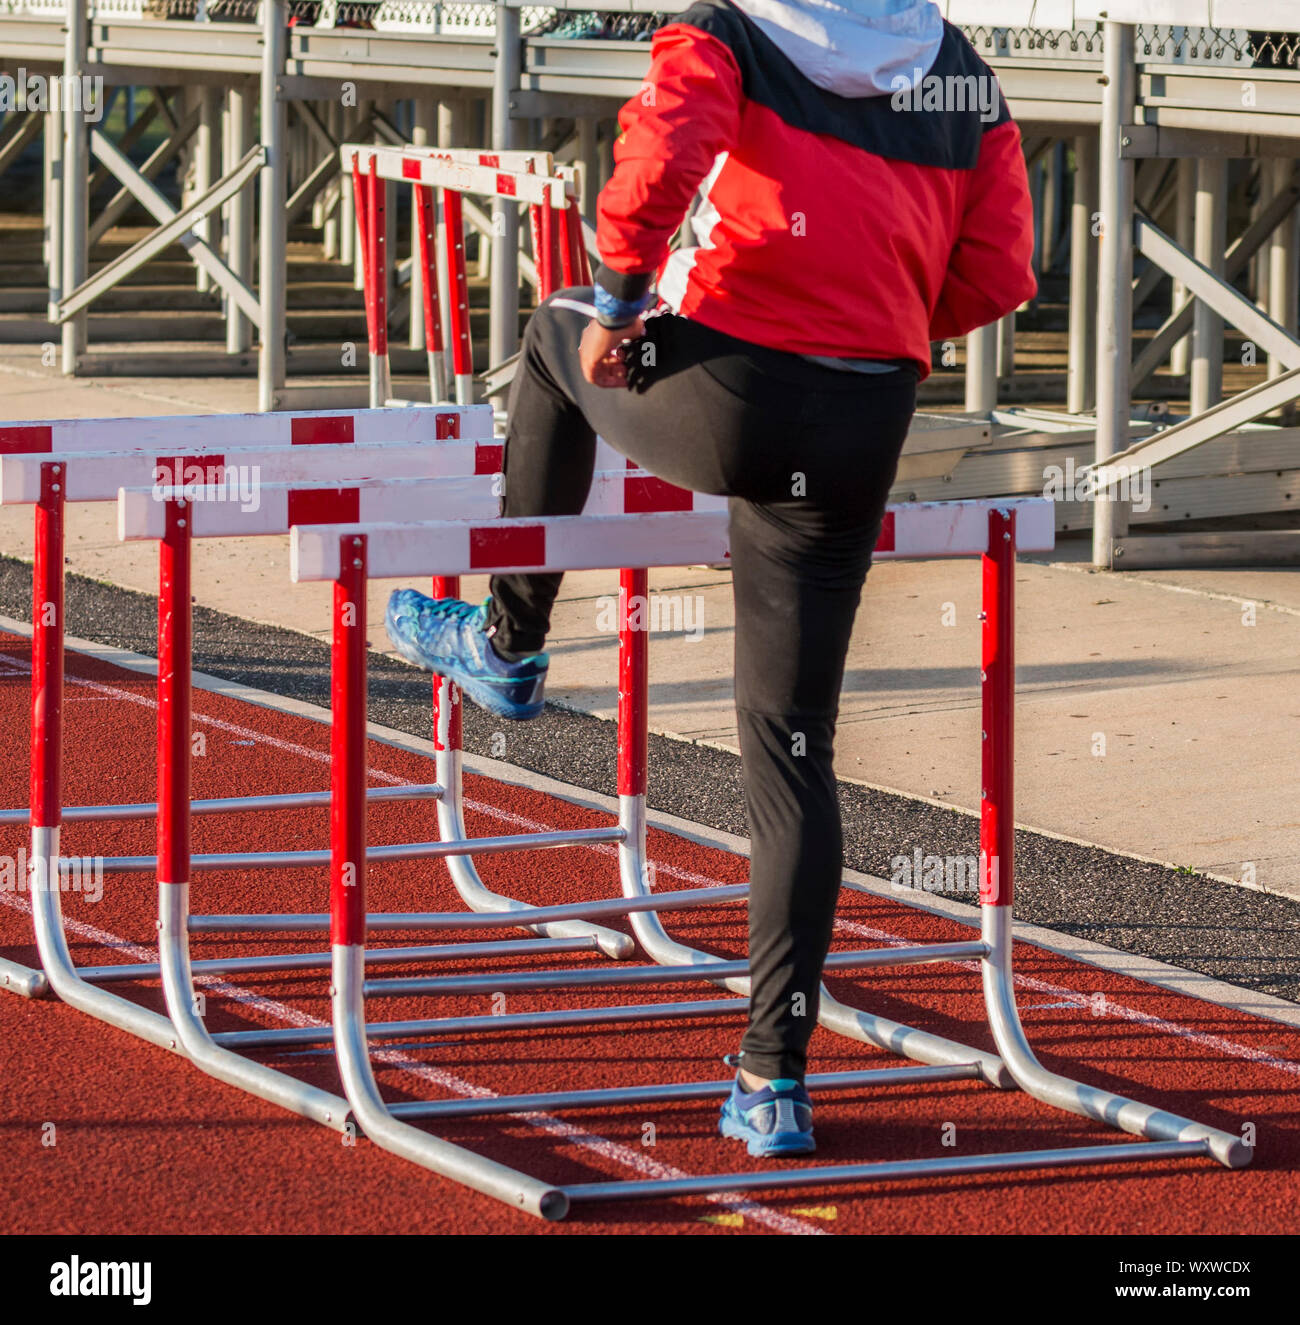 A high school girl track and field athlete is warming up for her hurdle race by walking over hurdles on a red track in her sweatsuit. Stock Photo